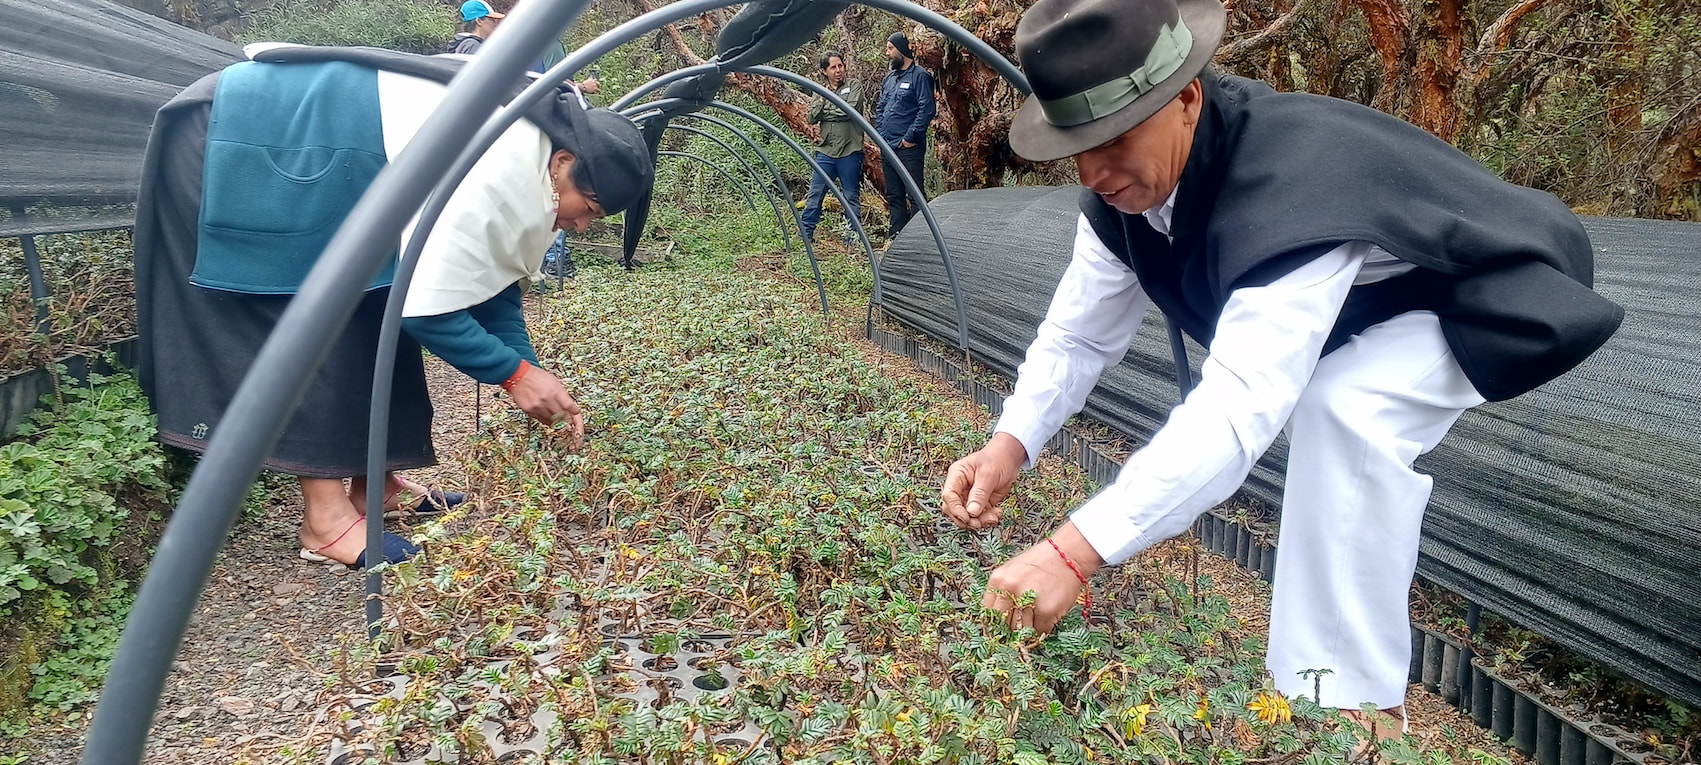 Picture of people caring for seedlings in a tree planting nursery in Ecuador